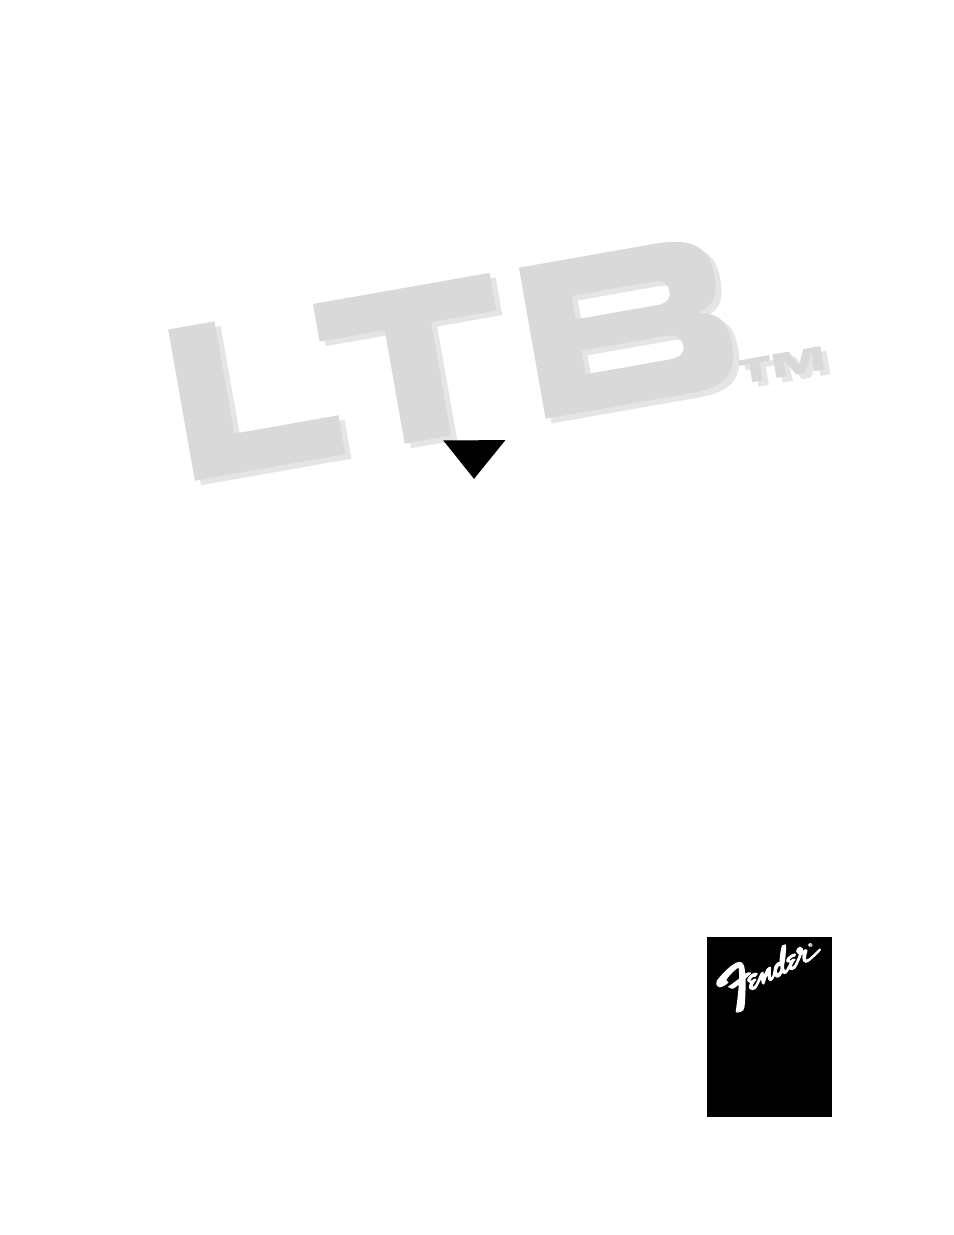 Fender LTB Portable Sound System User Manual | 11 pages